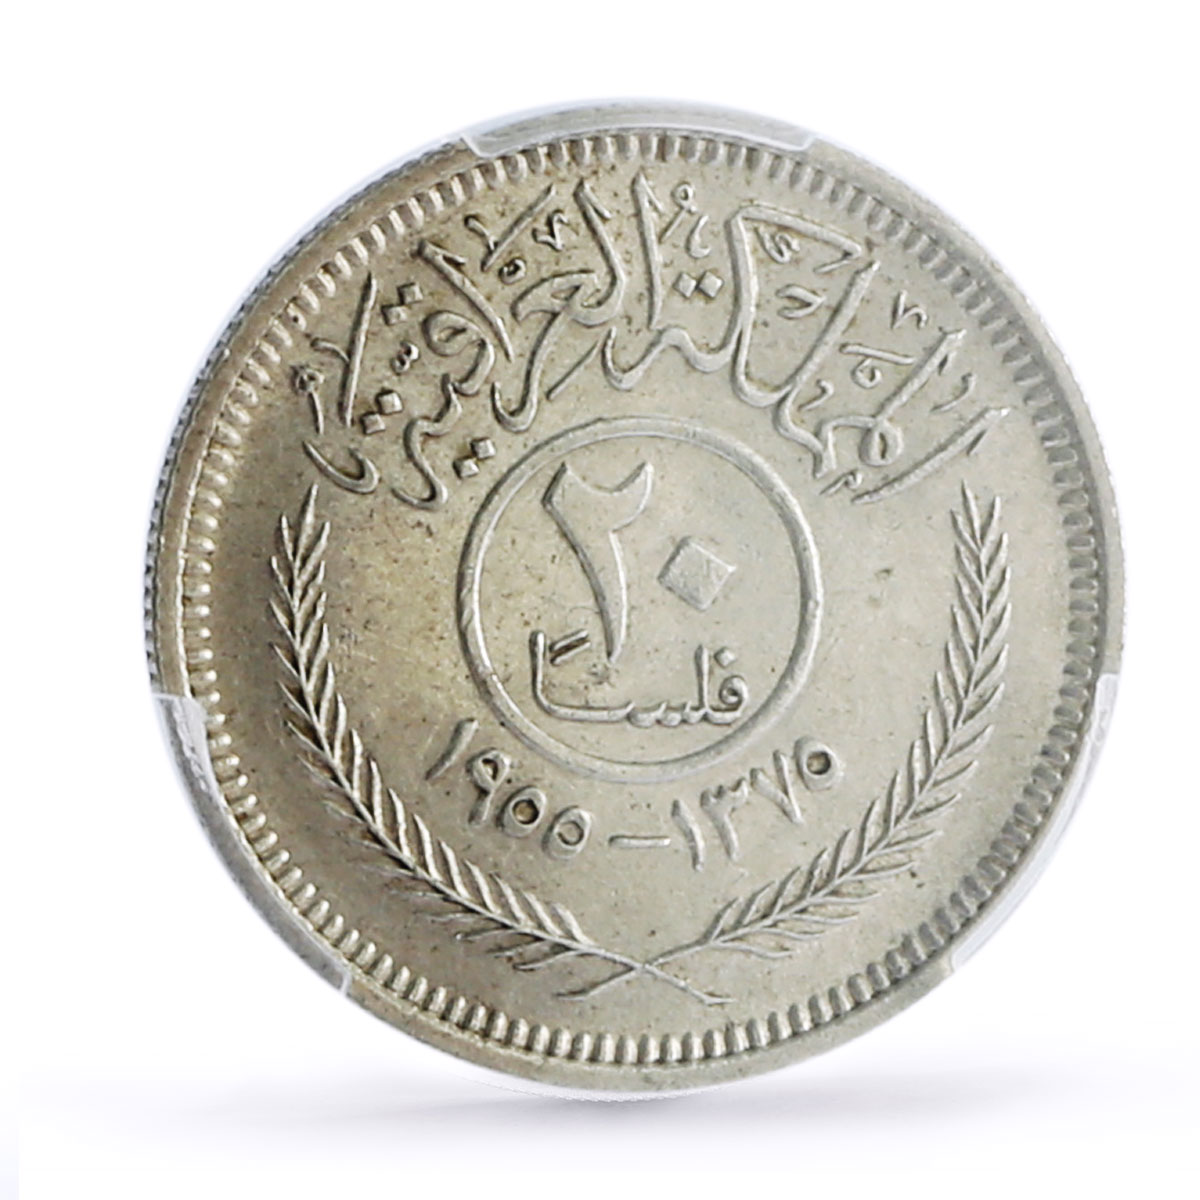 Iraq 20 fils Faisal II Coinage Coat of Arms AU Details PCGS silver coin 1955